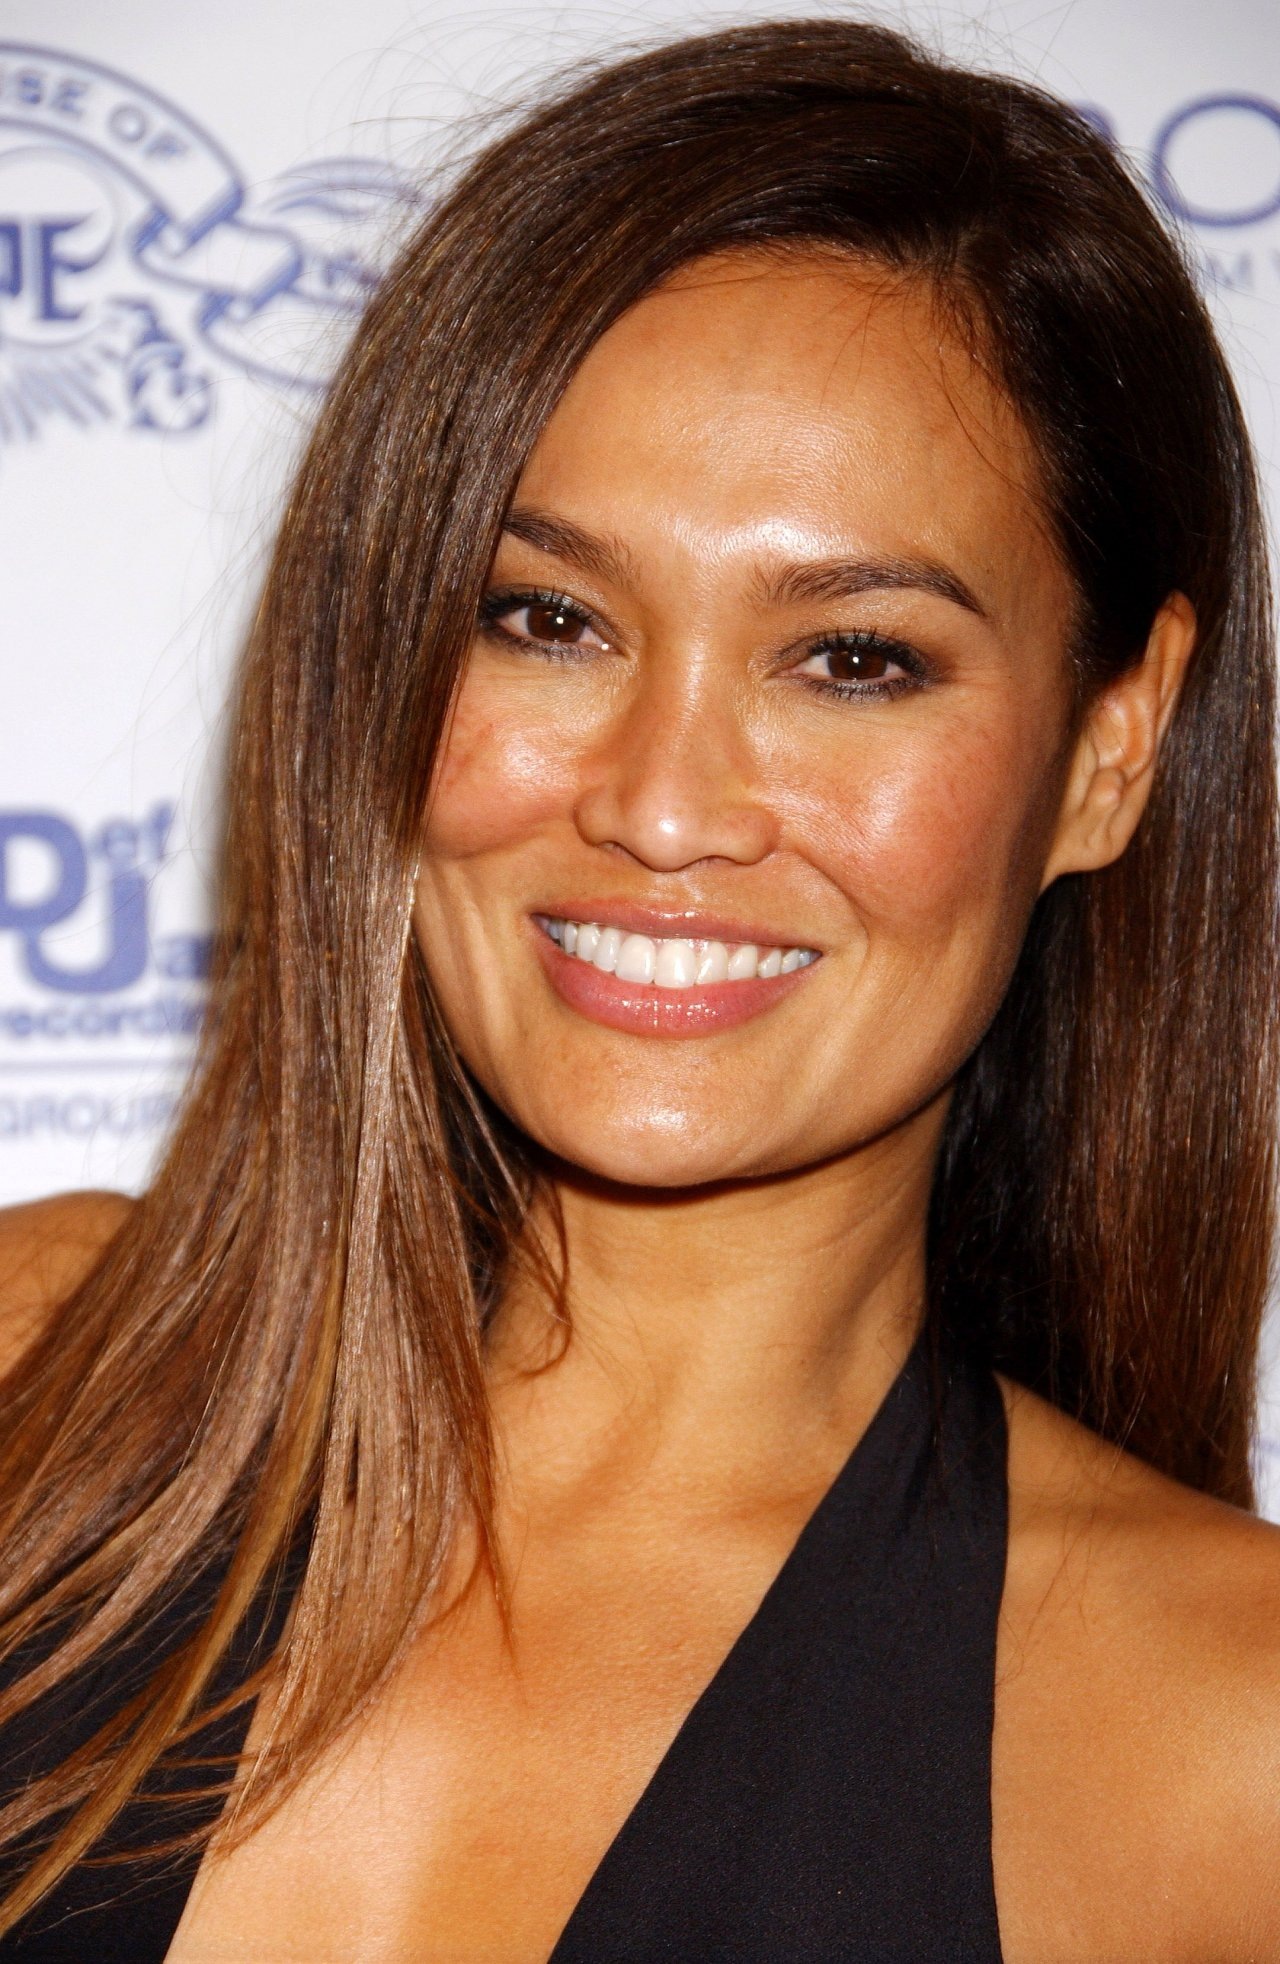 Tia Carrere leaked wallpapers